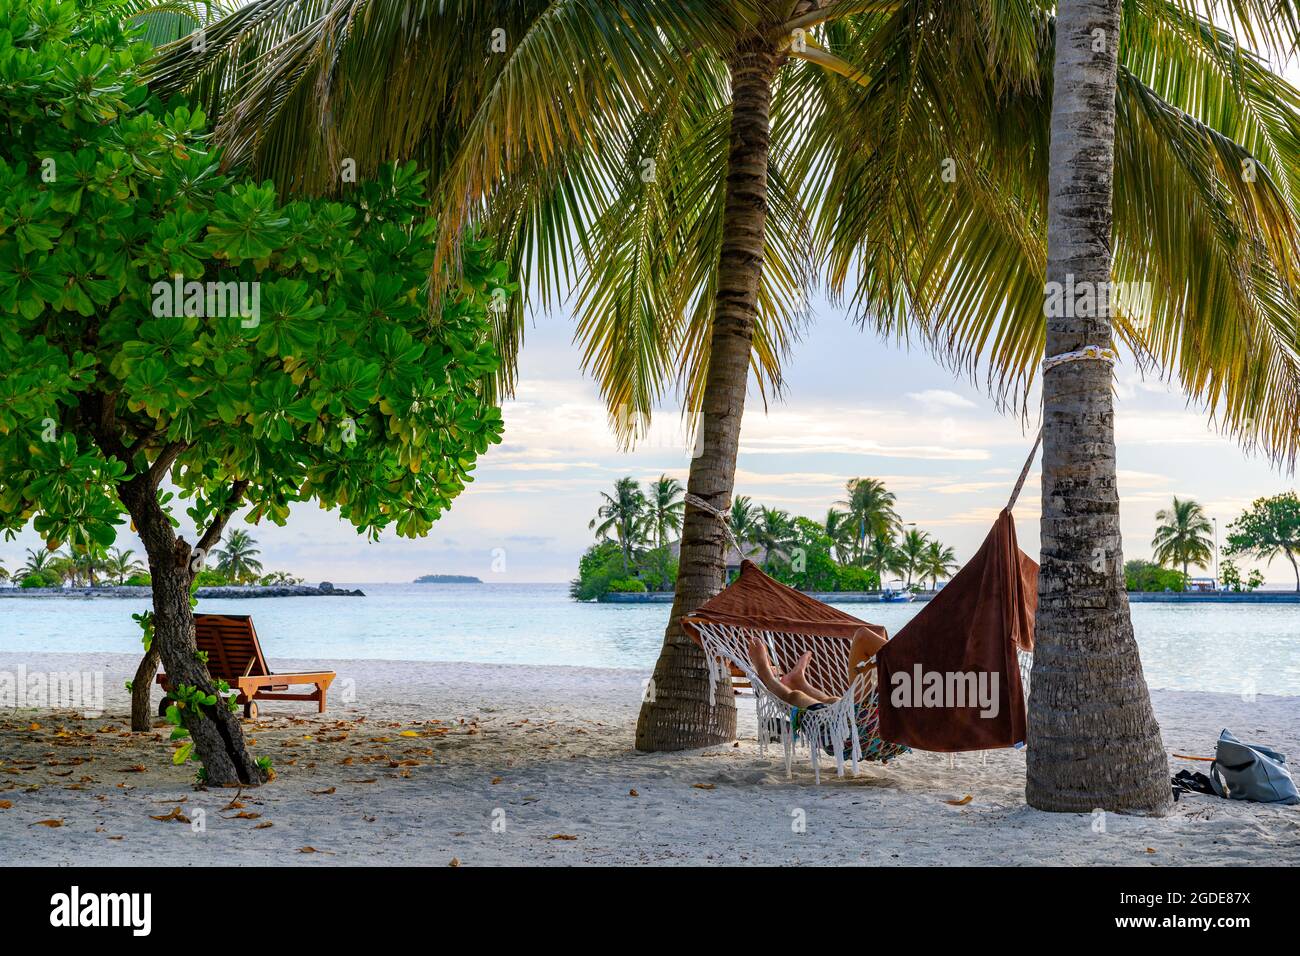 A man relaxing in a hammock under palm trees on a tropical island in the evening Stock Photo